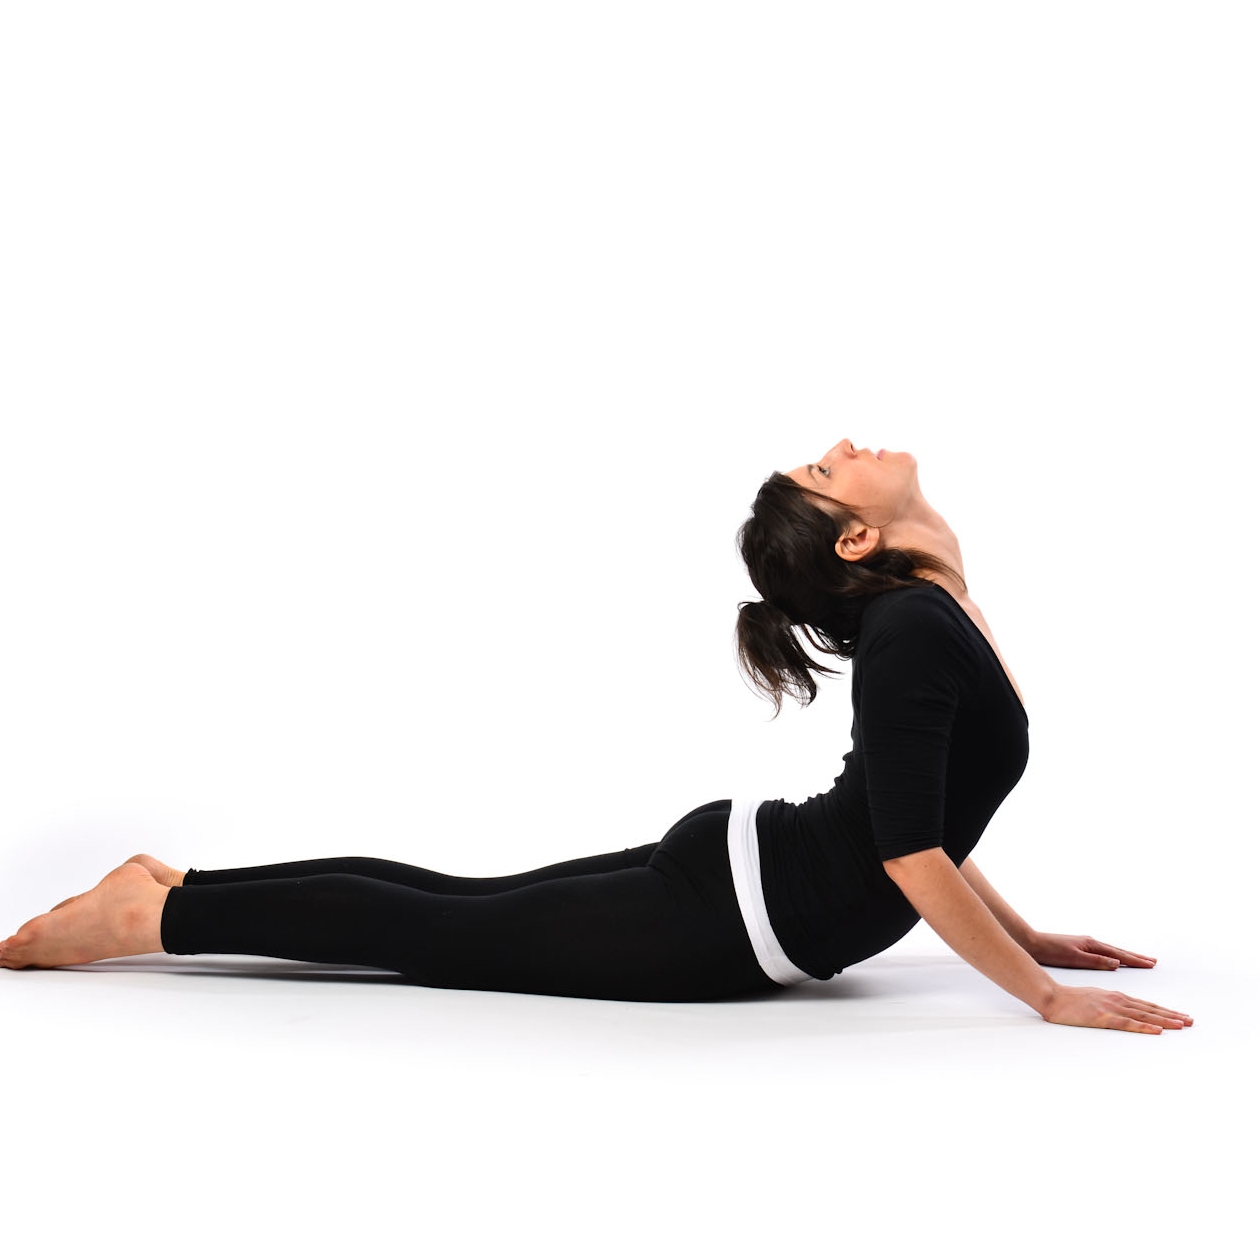 Personal Yoga Trainer At Home in delhi / Yoga Classes At Home / Yoga At Home